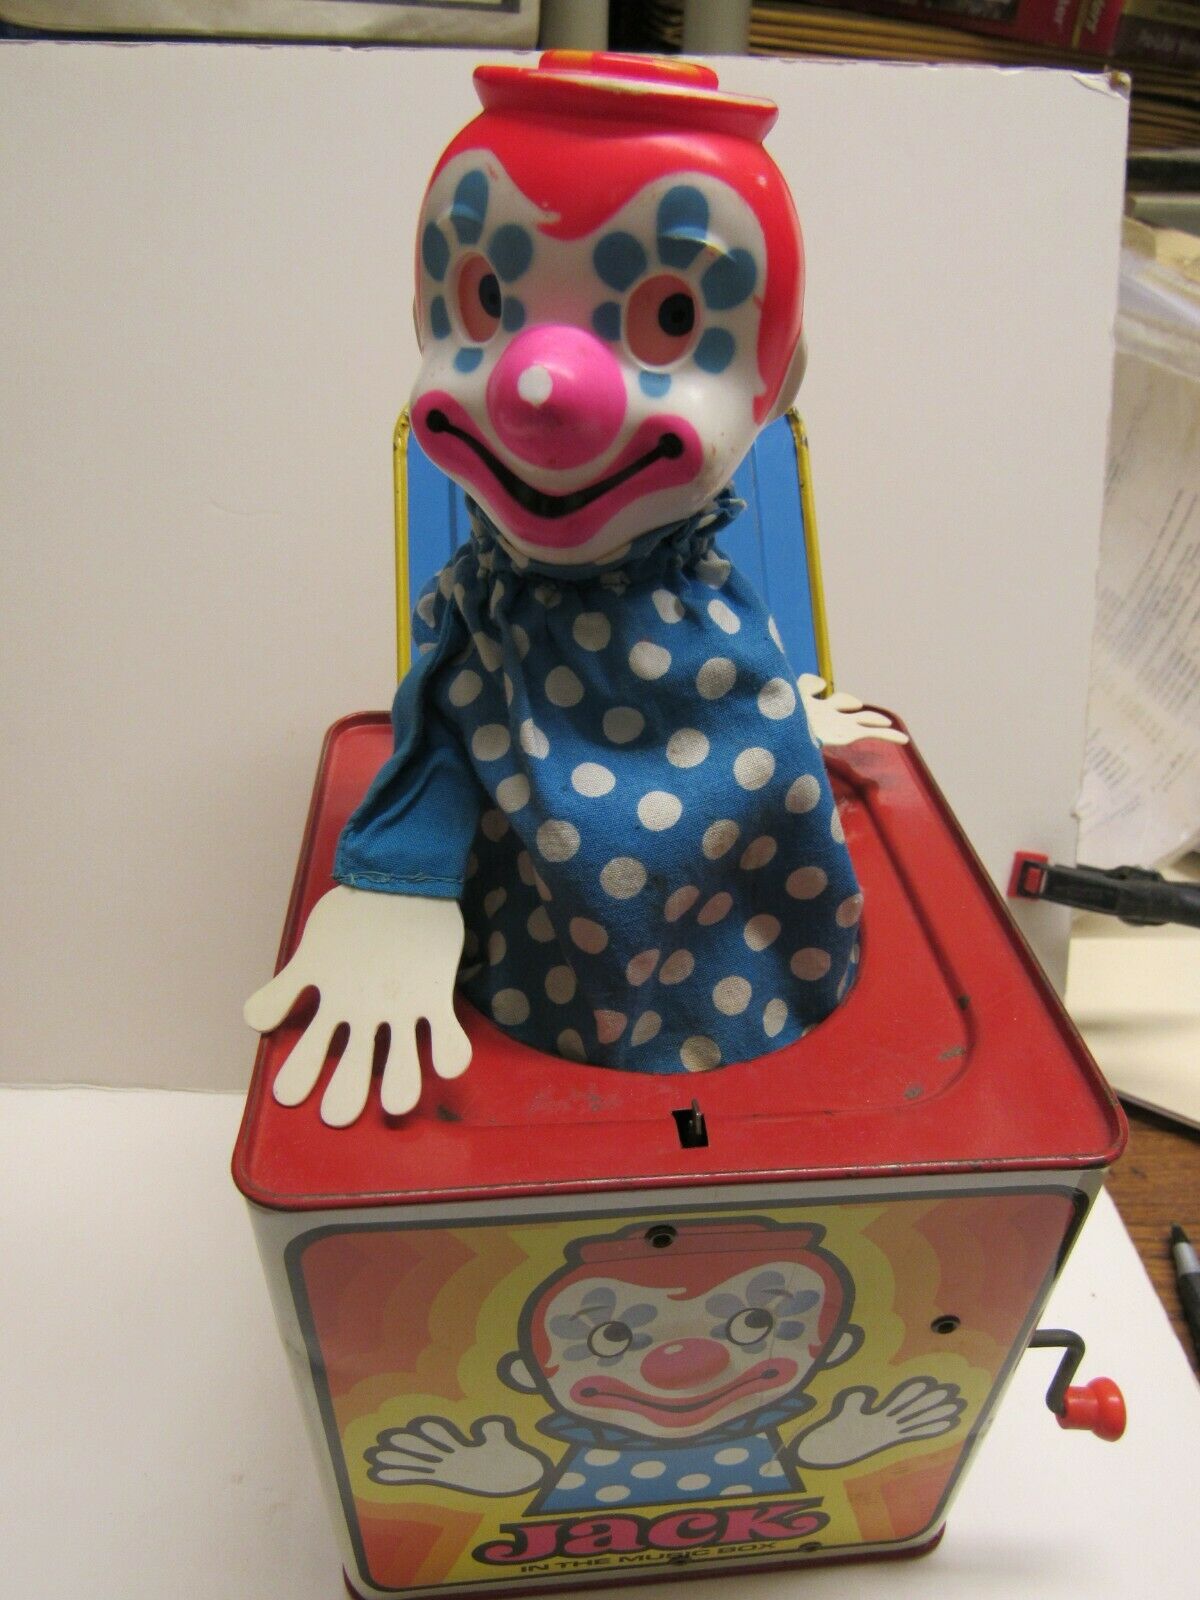 1971 Mattel Tin Litho Jack In The Music Box Clown Works Well In Original Box